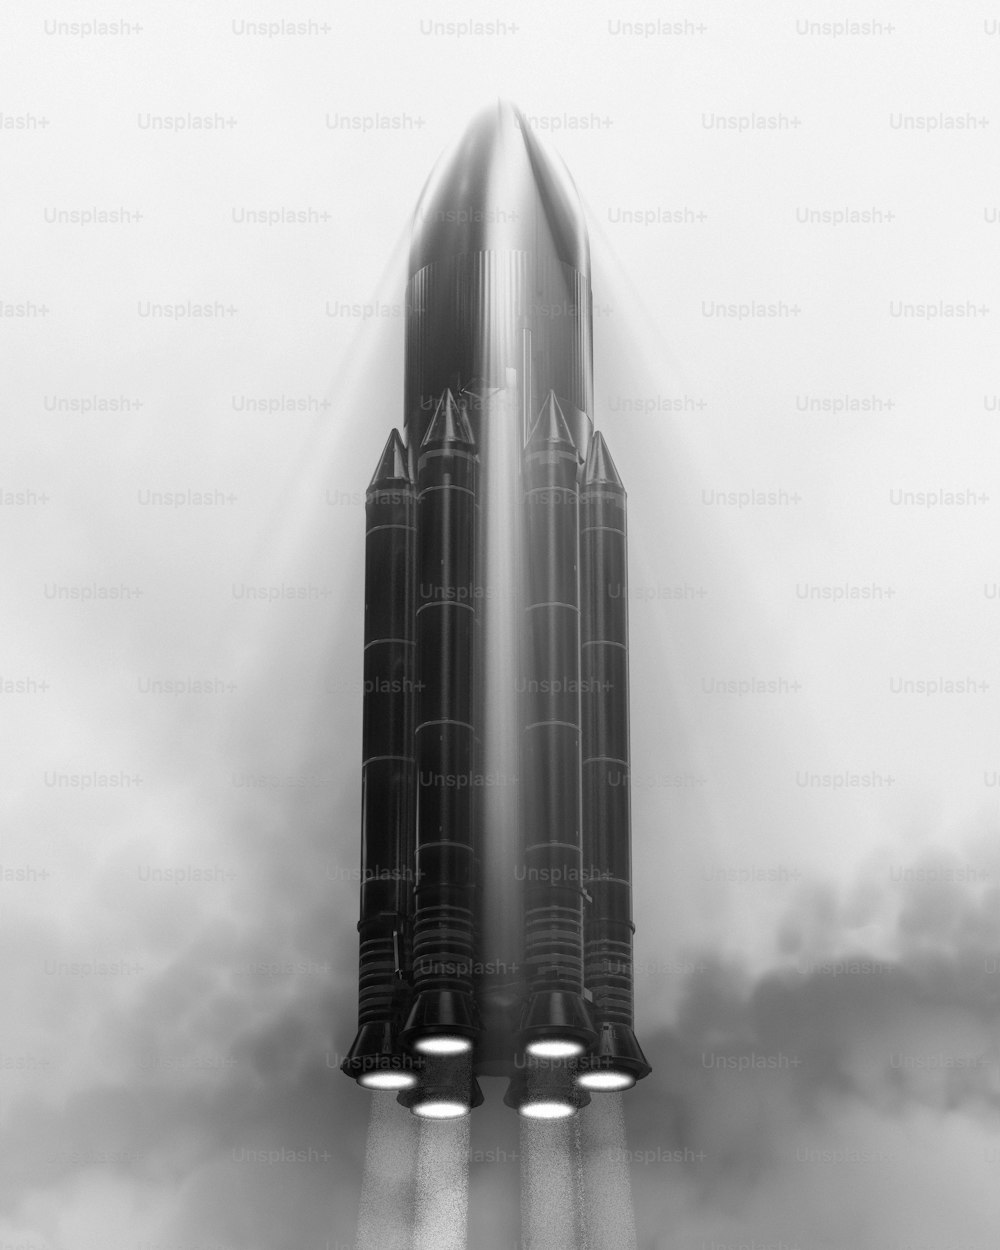 a black and white photo of a rocket